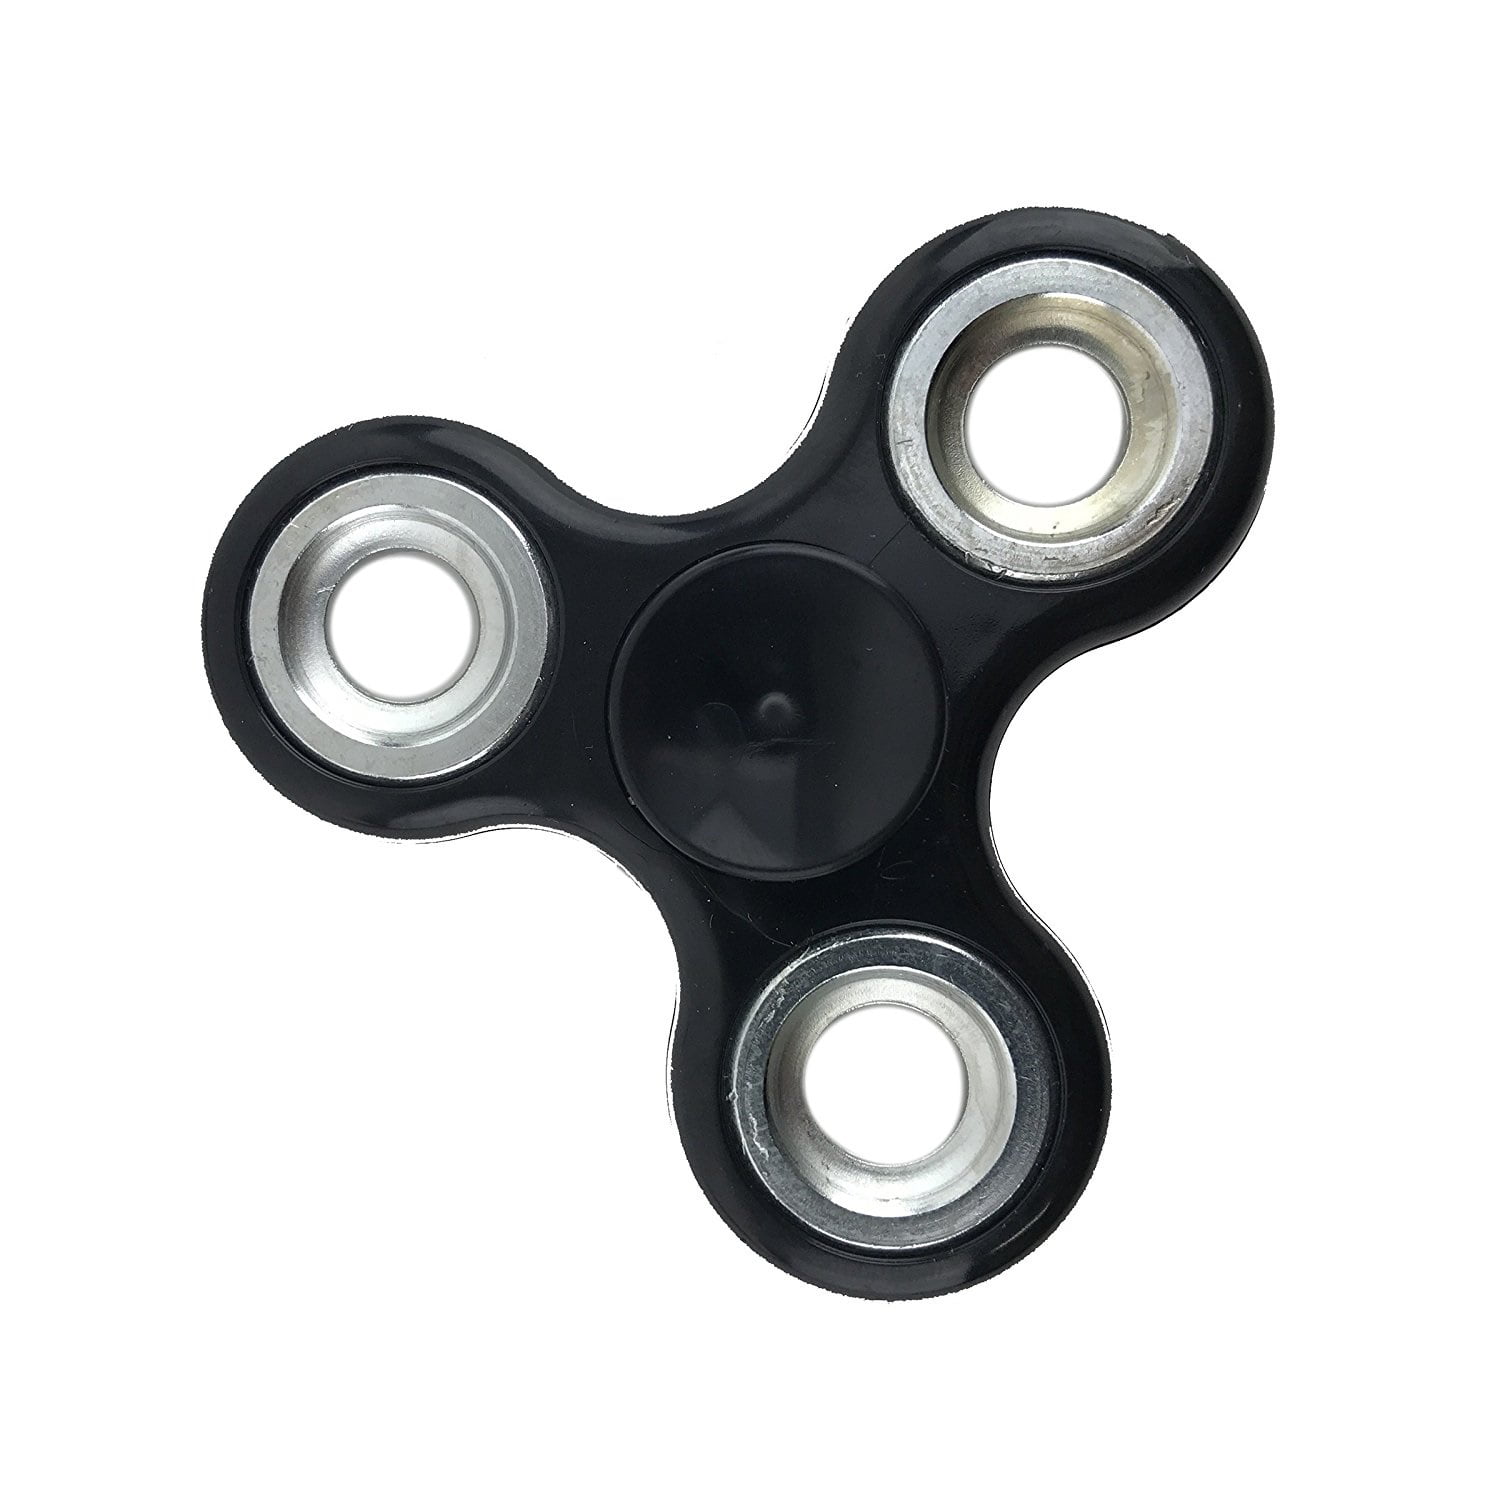 Tri Fidget Hand Spinner Toys, Ultra Fast Toy, Great Gift ADD, ADHD, Anxiety and Autism Adult Children (BLACK) - Walmart.com